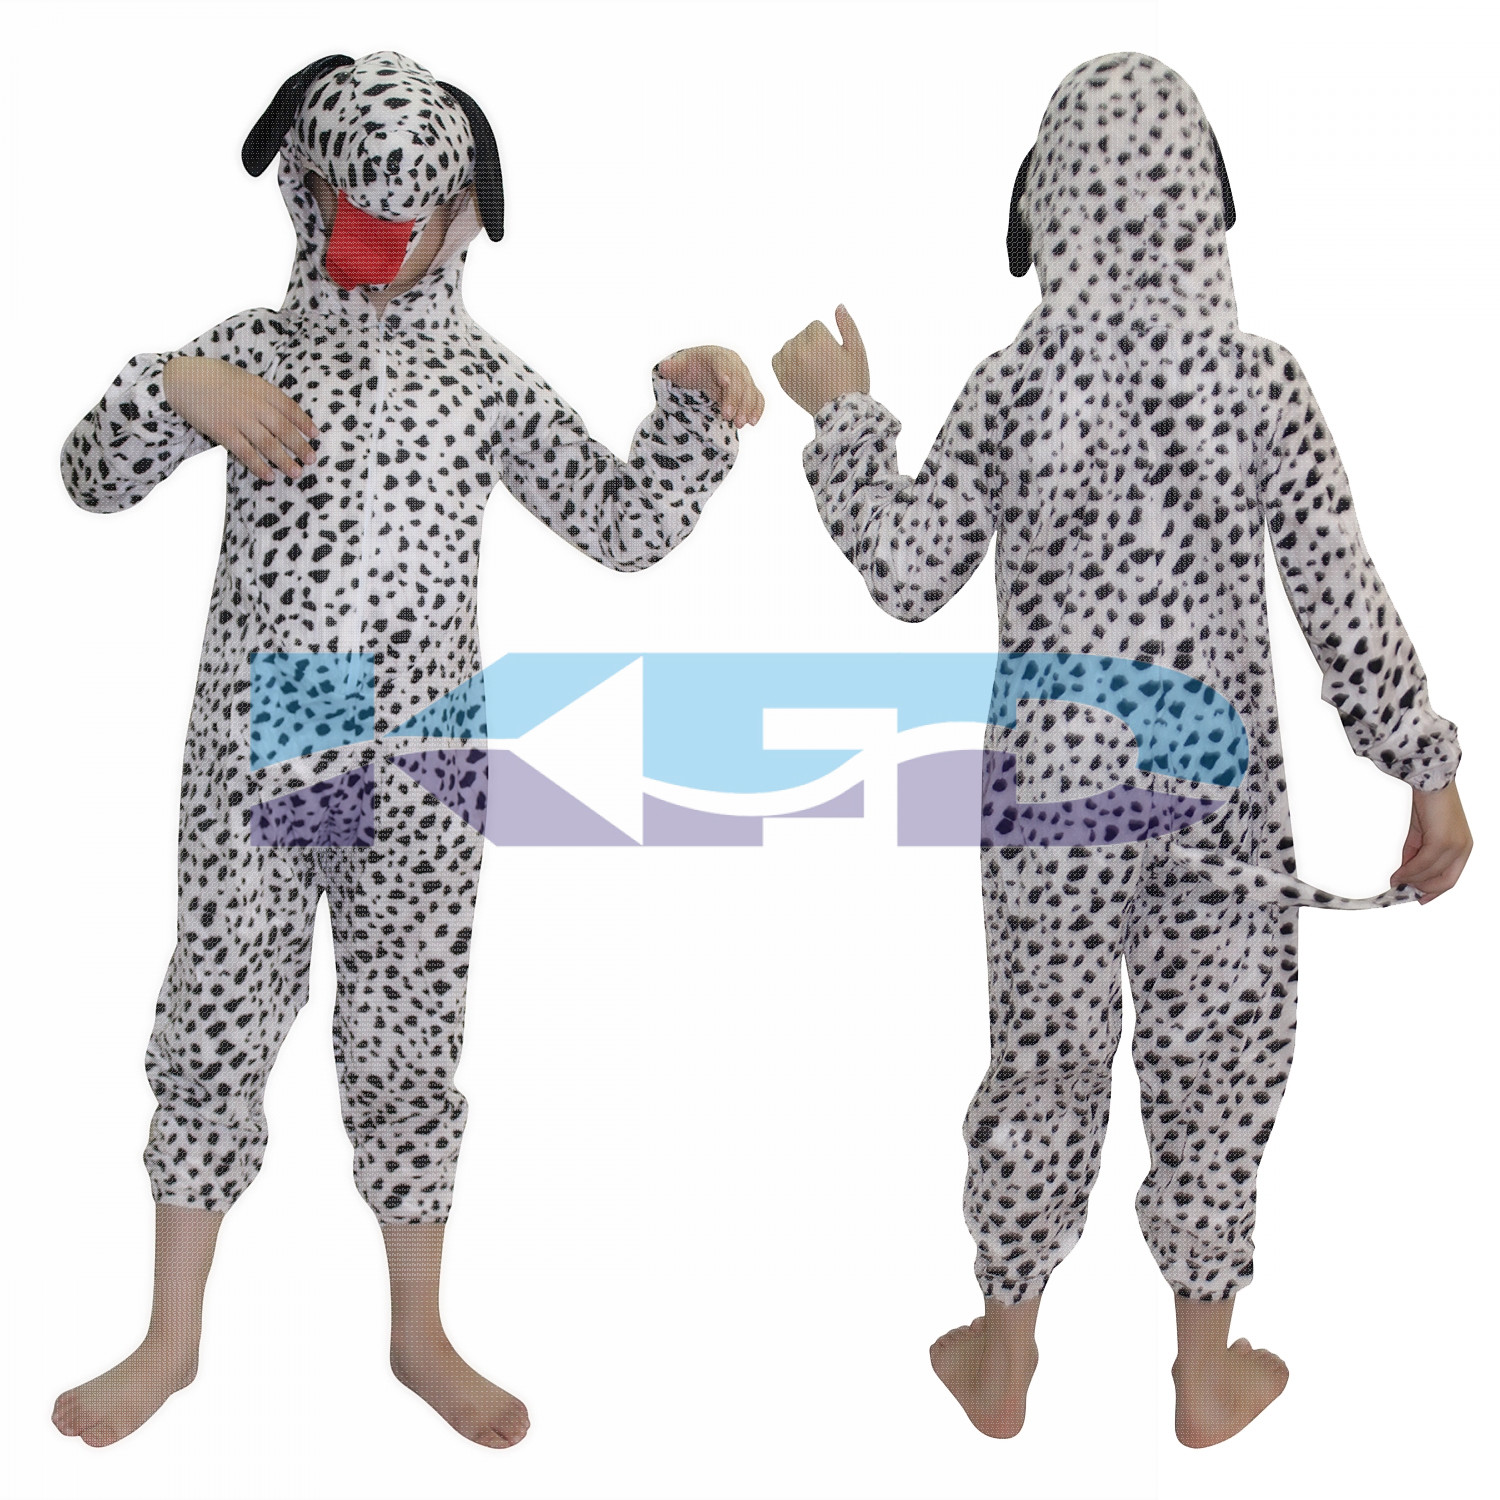 Dog fancy dress for kids,Pet Animal Costume for School Annual function/Theme Party/Competition/Stage Shows Dress